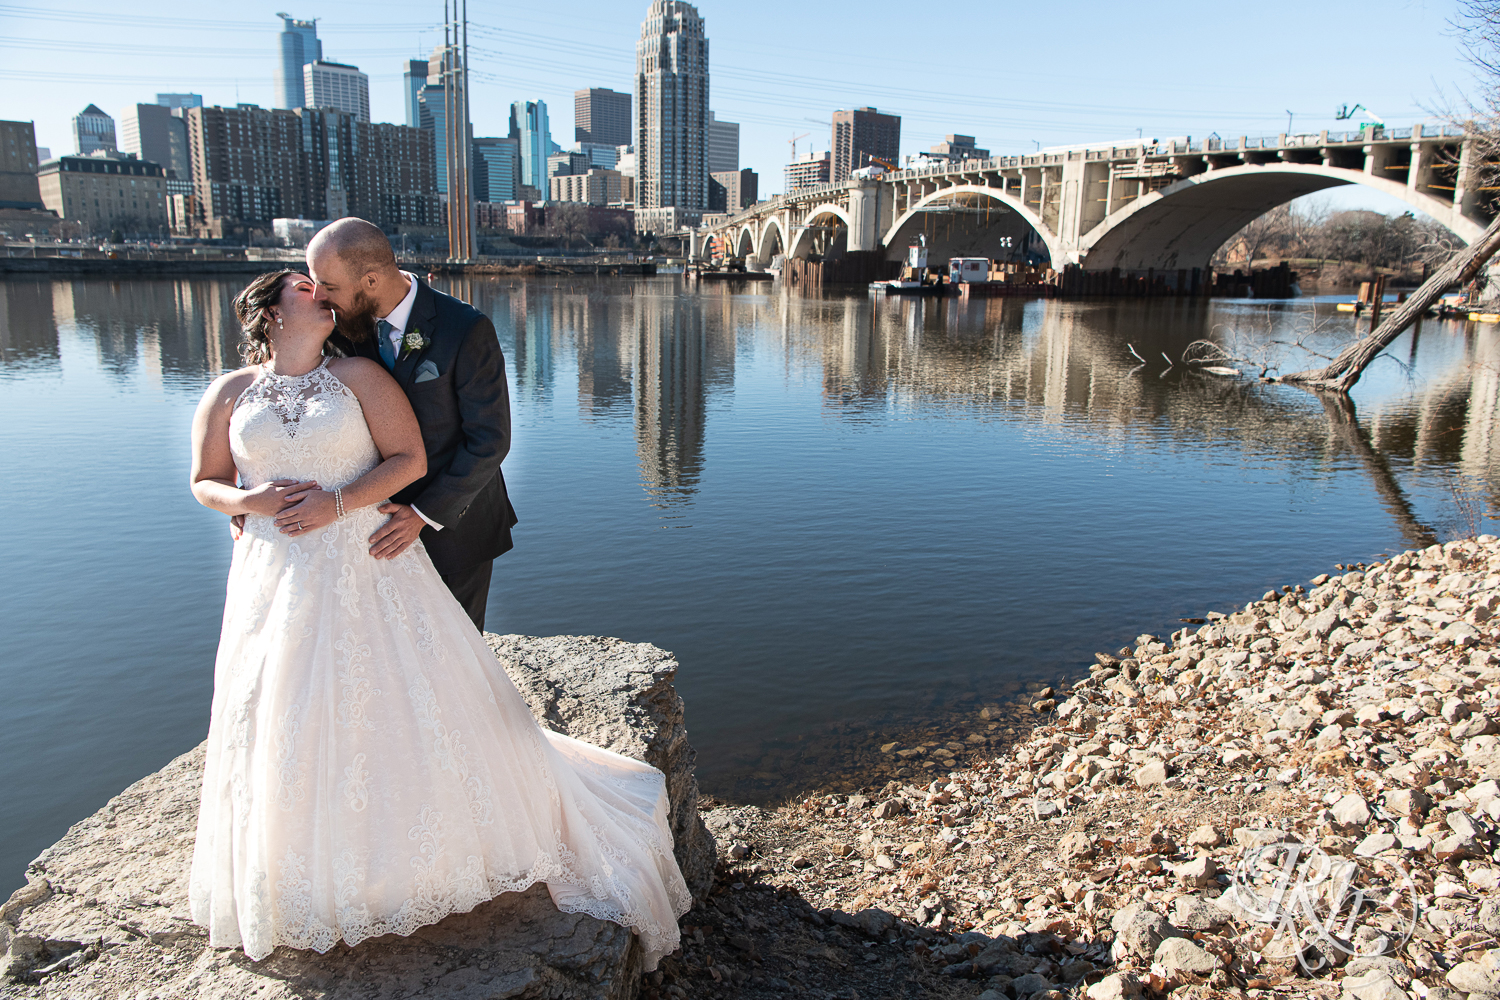 Bride and groom kiss in front of river in Saint Anthony Main in Minneapolis, Minnesota.